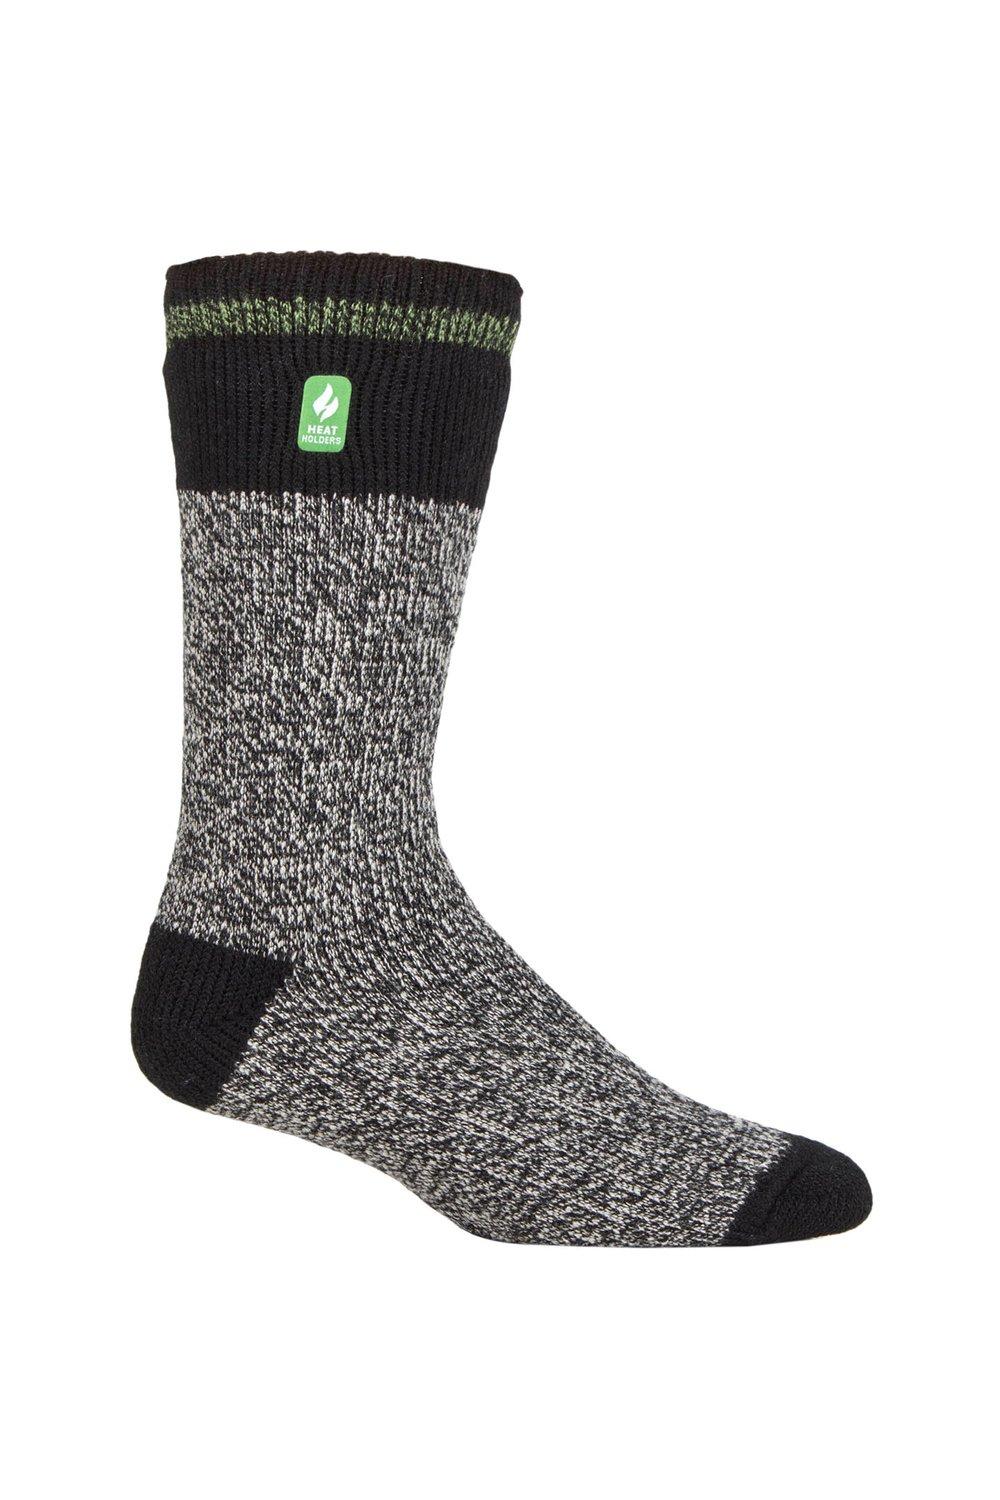 1 Pair 2.3 TOG Patterned and Plain Thermal Socks